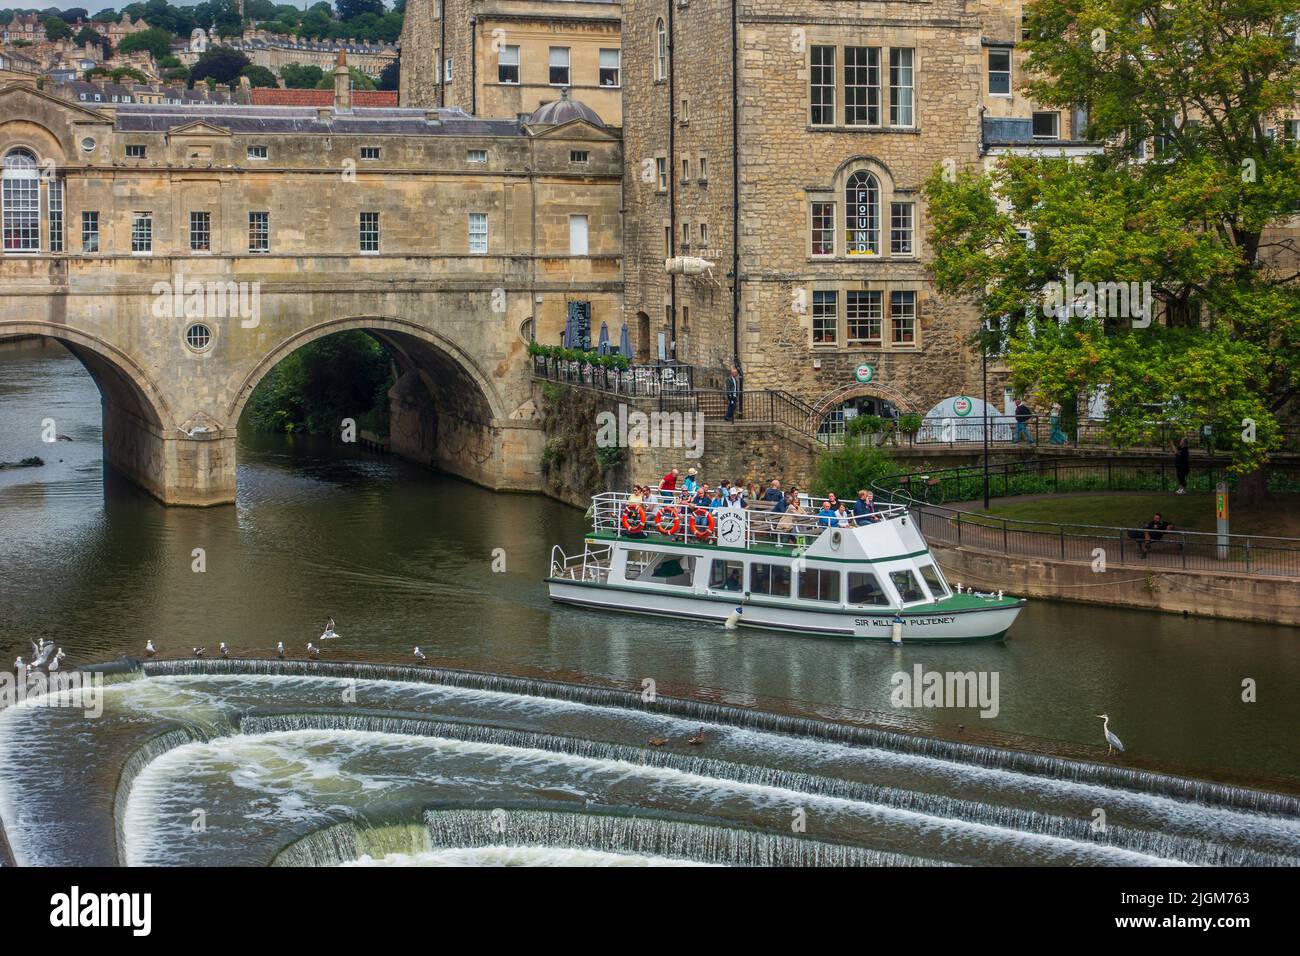 Pulteney Weir,River Avon,Bath. River Trip,Boat,Sir William Pulteney has just exited Pultney Bridge.  The weir is part of the flood protection scheme. Stock Photo